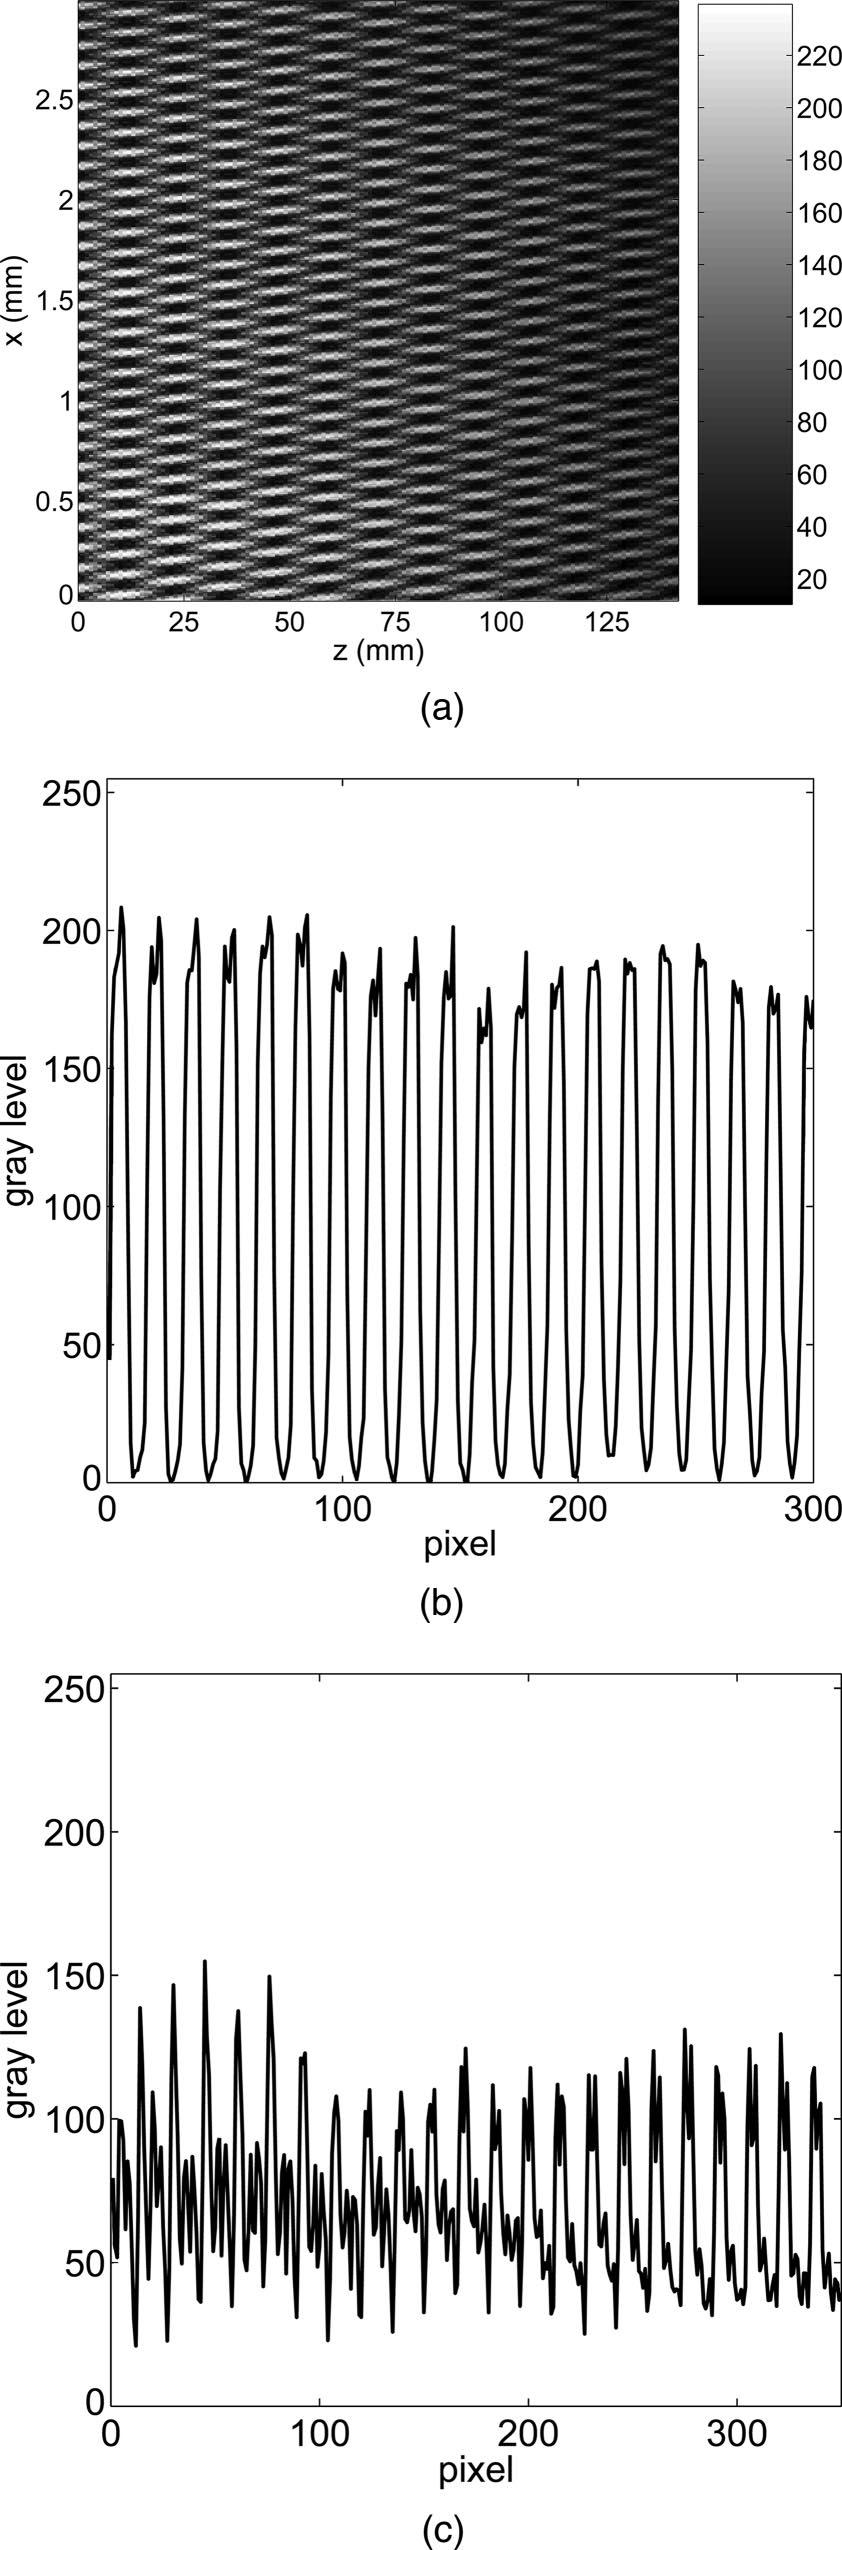 Fig. 5. (a) Experimental intensity obtained after a diffraction grating (period 100 m) when it is illuminated with a monochromatic plane wave (wavelength 670 nm).